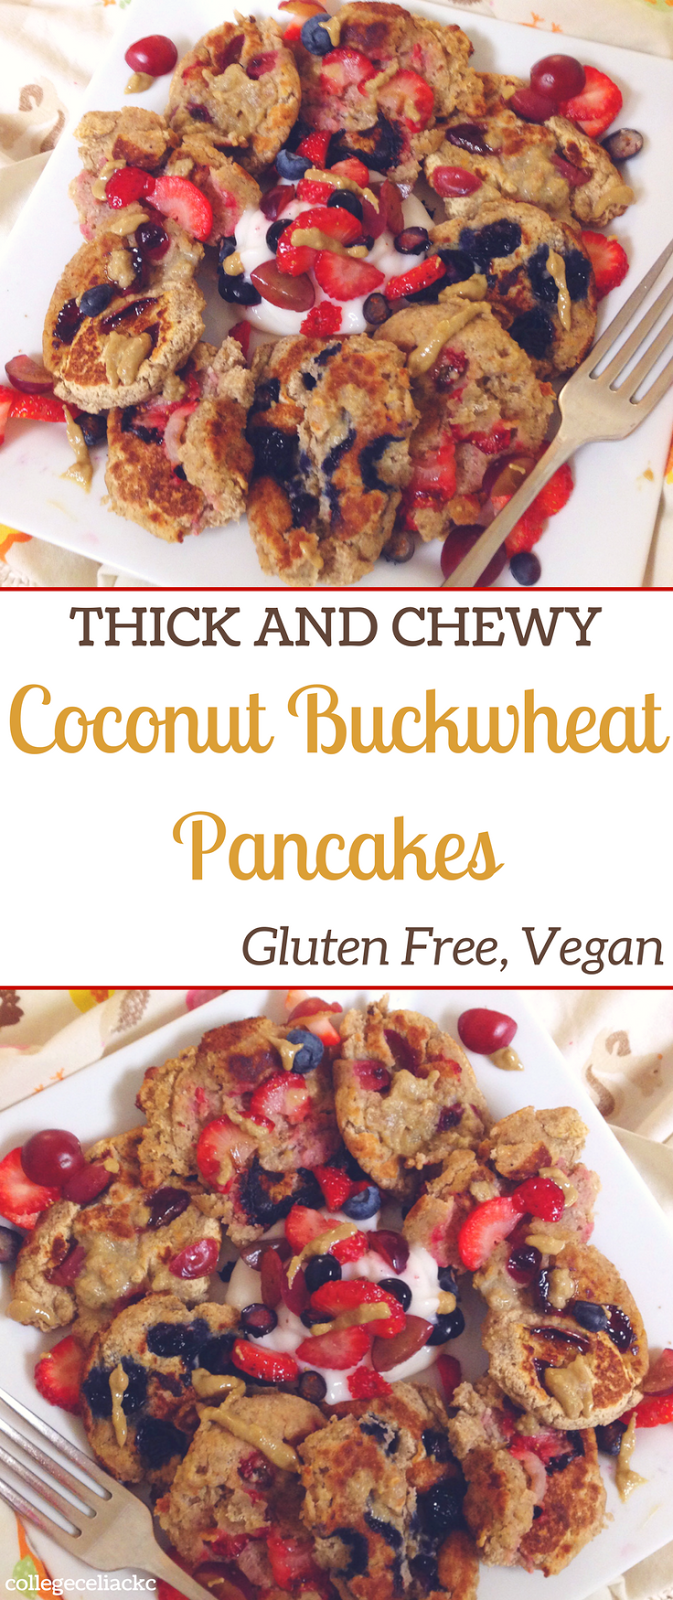 Thick and Chewy Coconut and Buckwheat Pancakes (Gluten Free, Vegan)